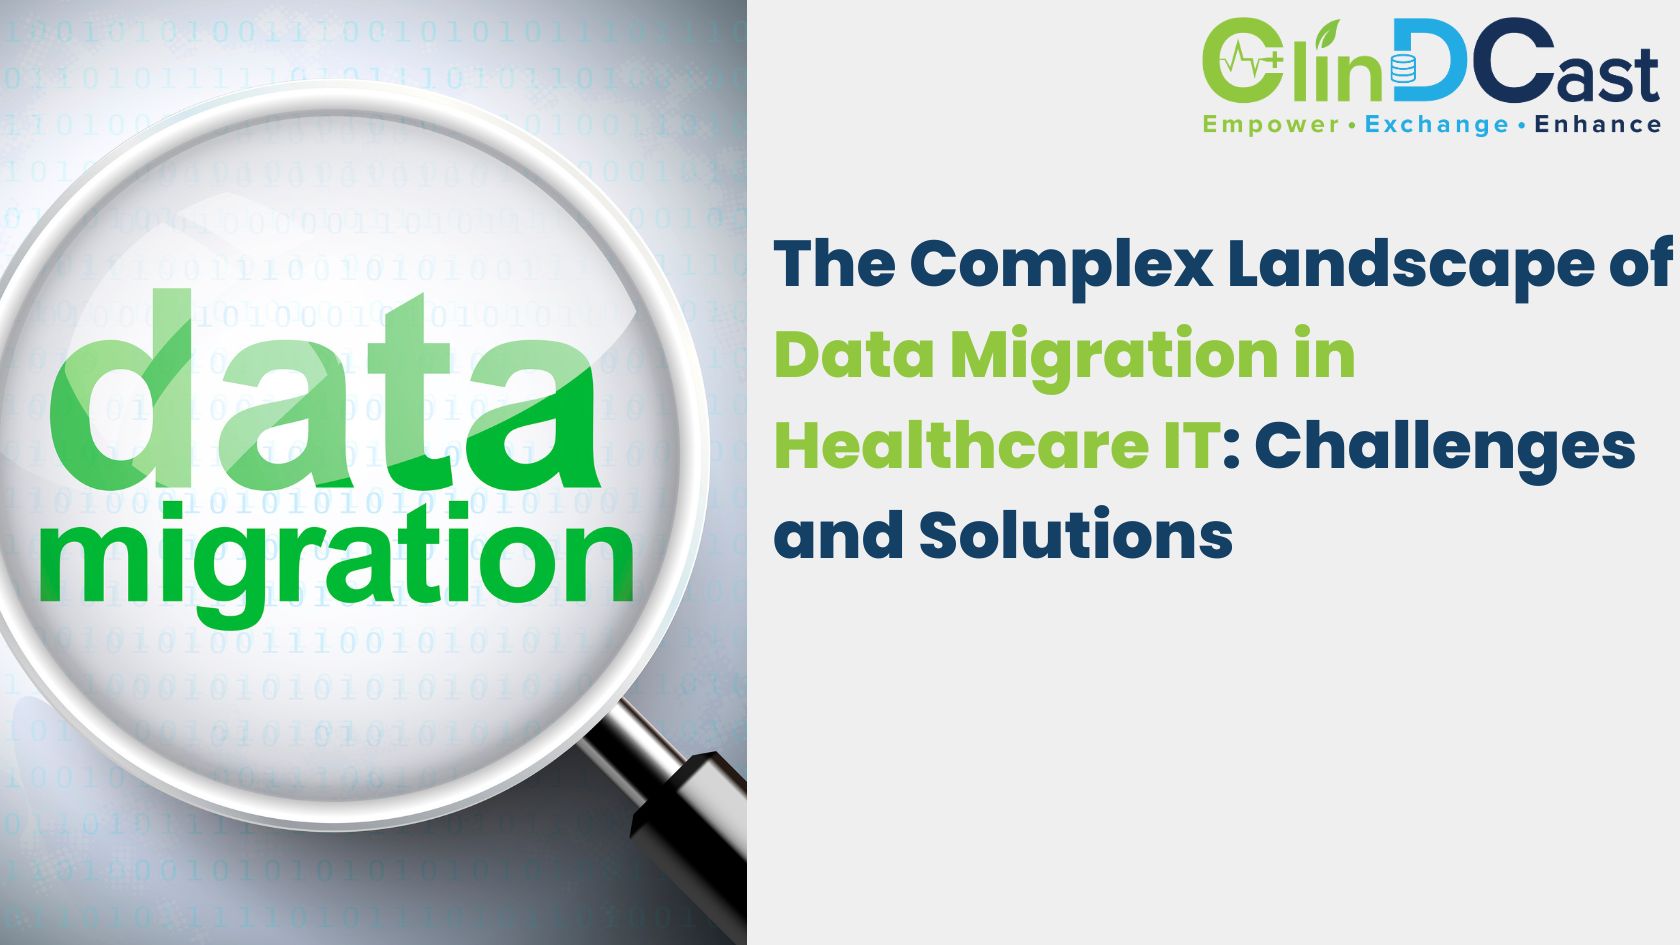 The Complex Landscape of Data Migration in Healthcare IT: Challenges and Solutions